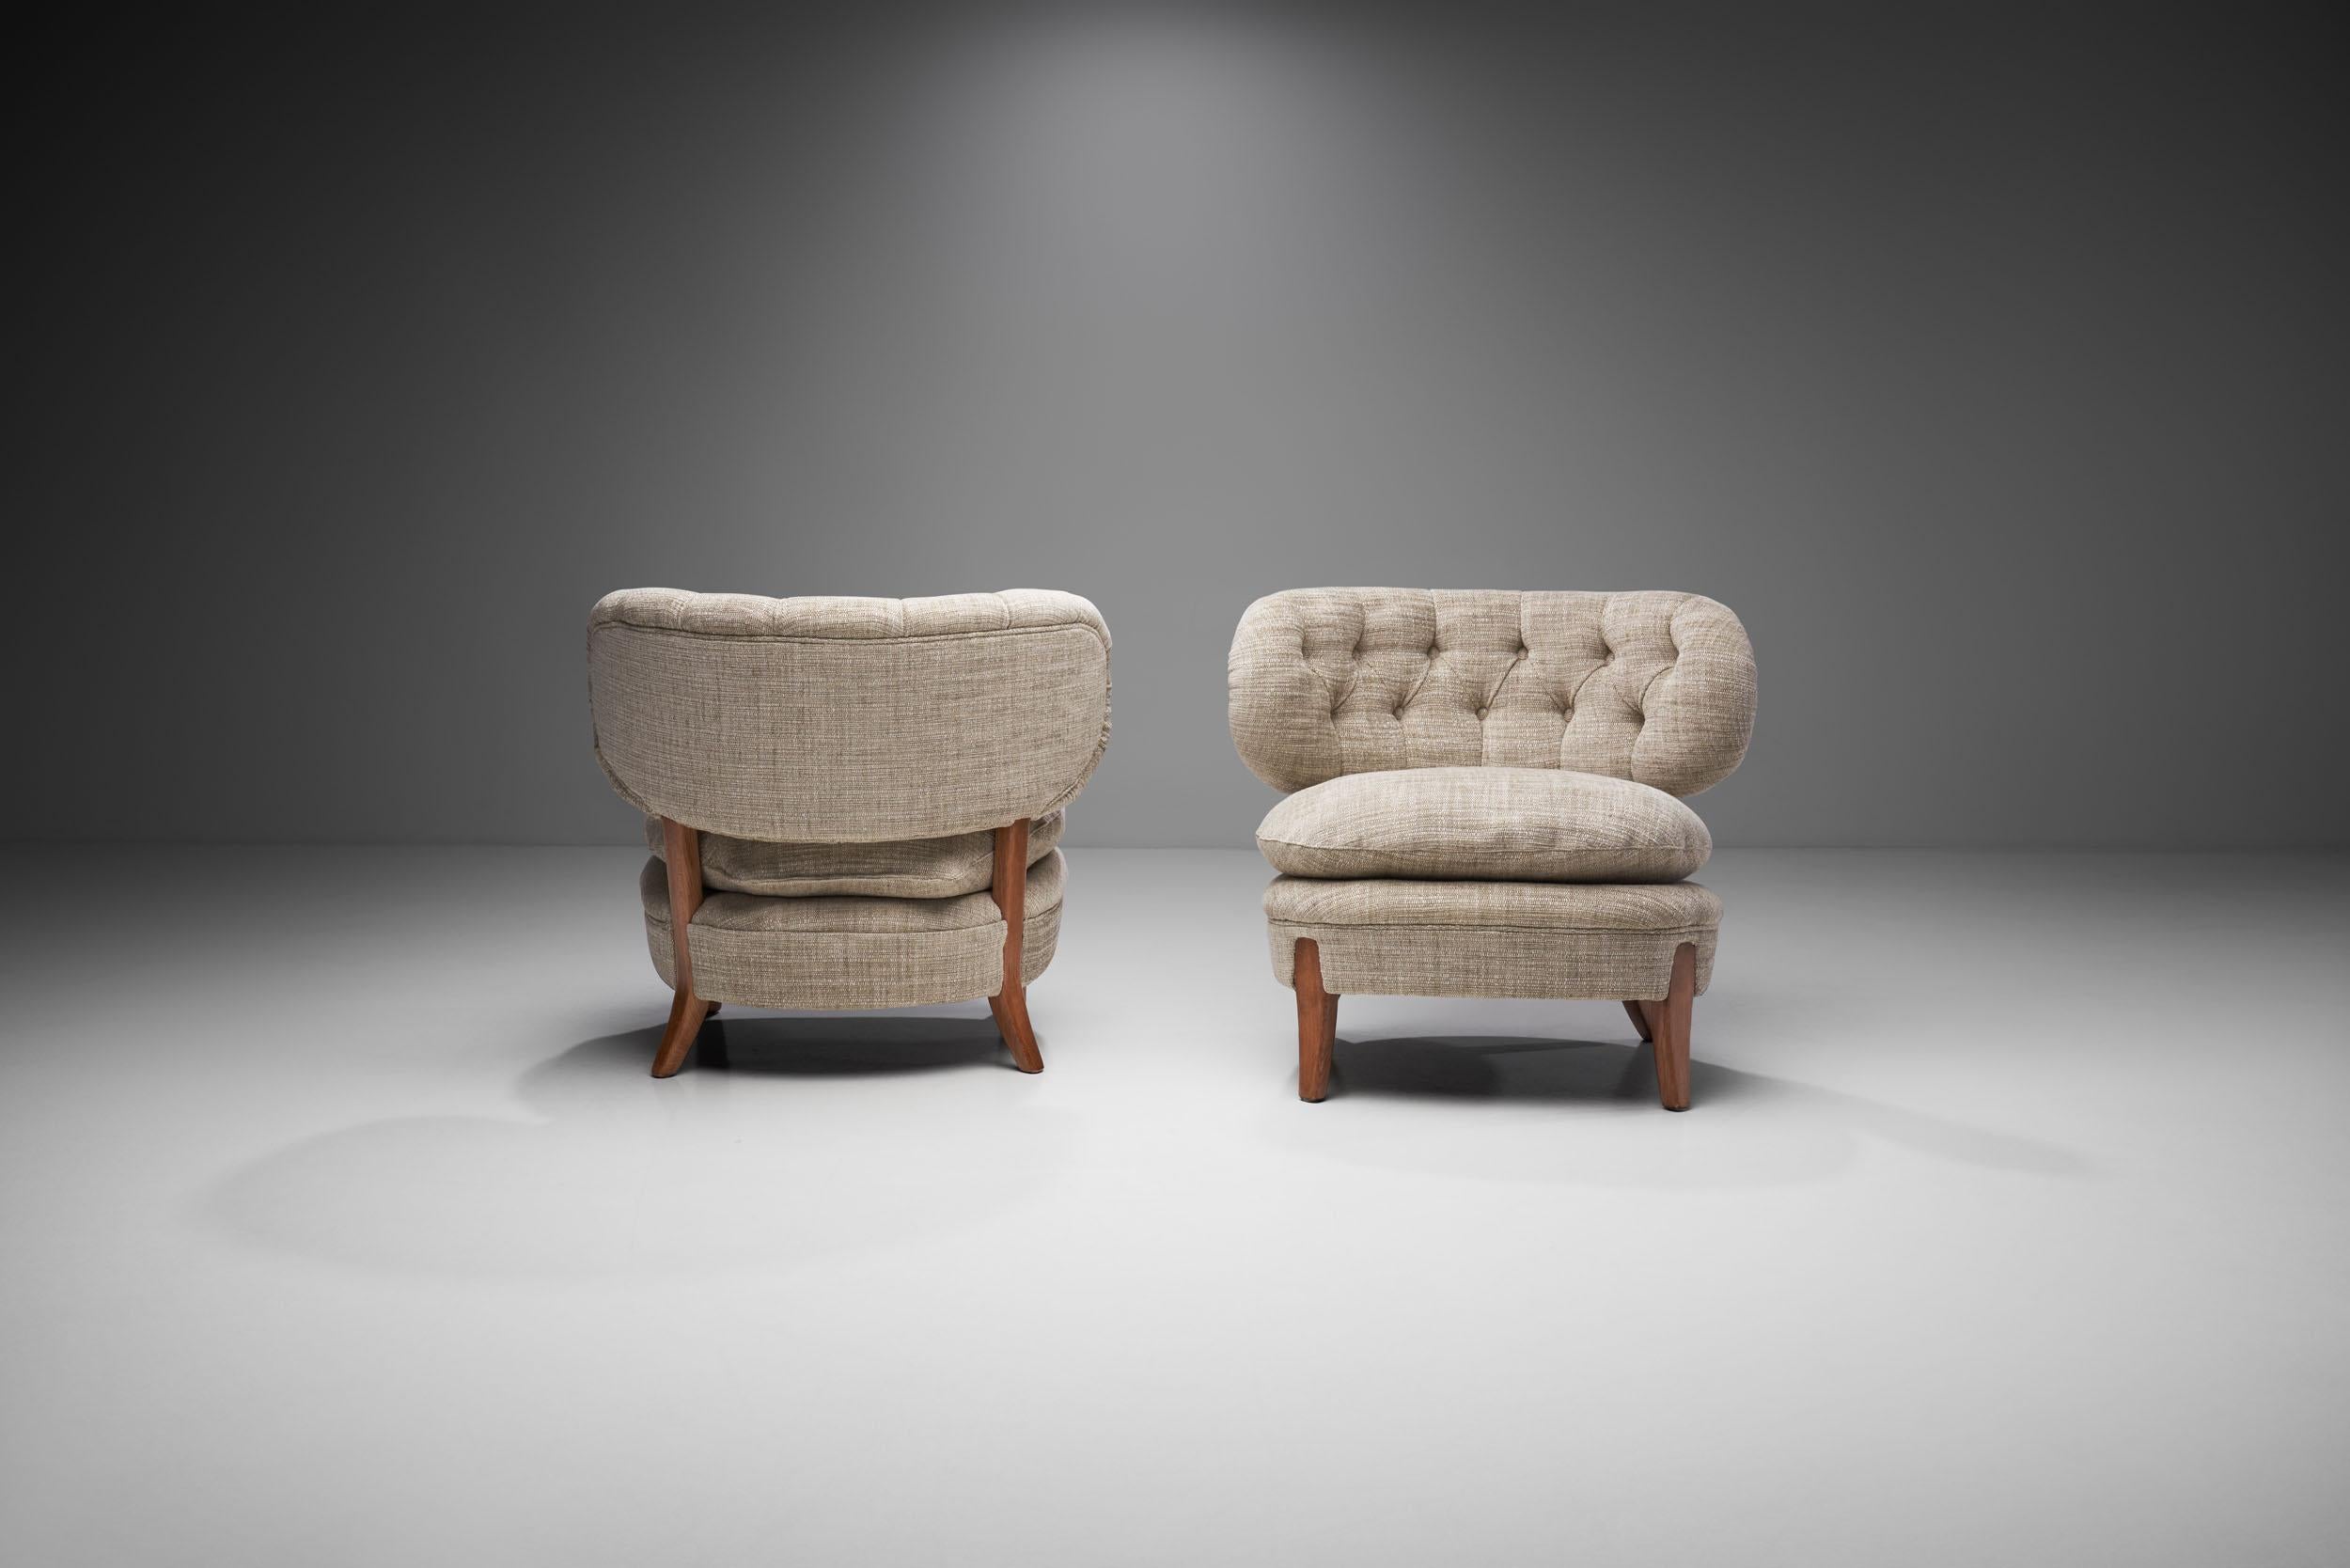 Swedish Pair of “Schulz” Lounge Chairs by Otto Schulz, Sweden, 1960s